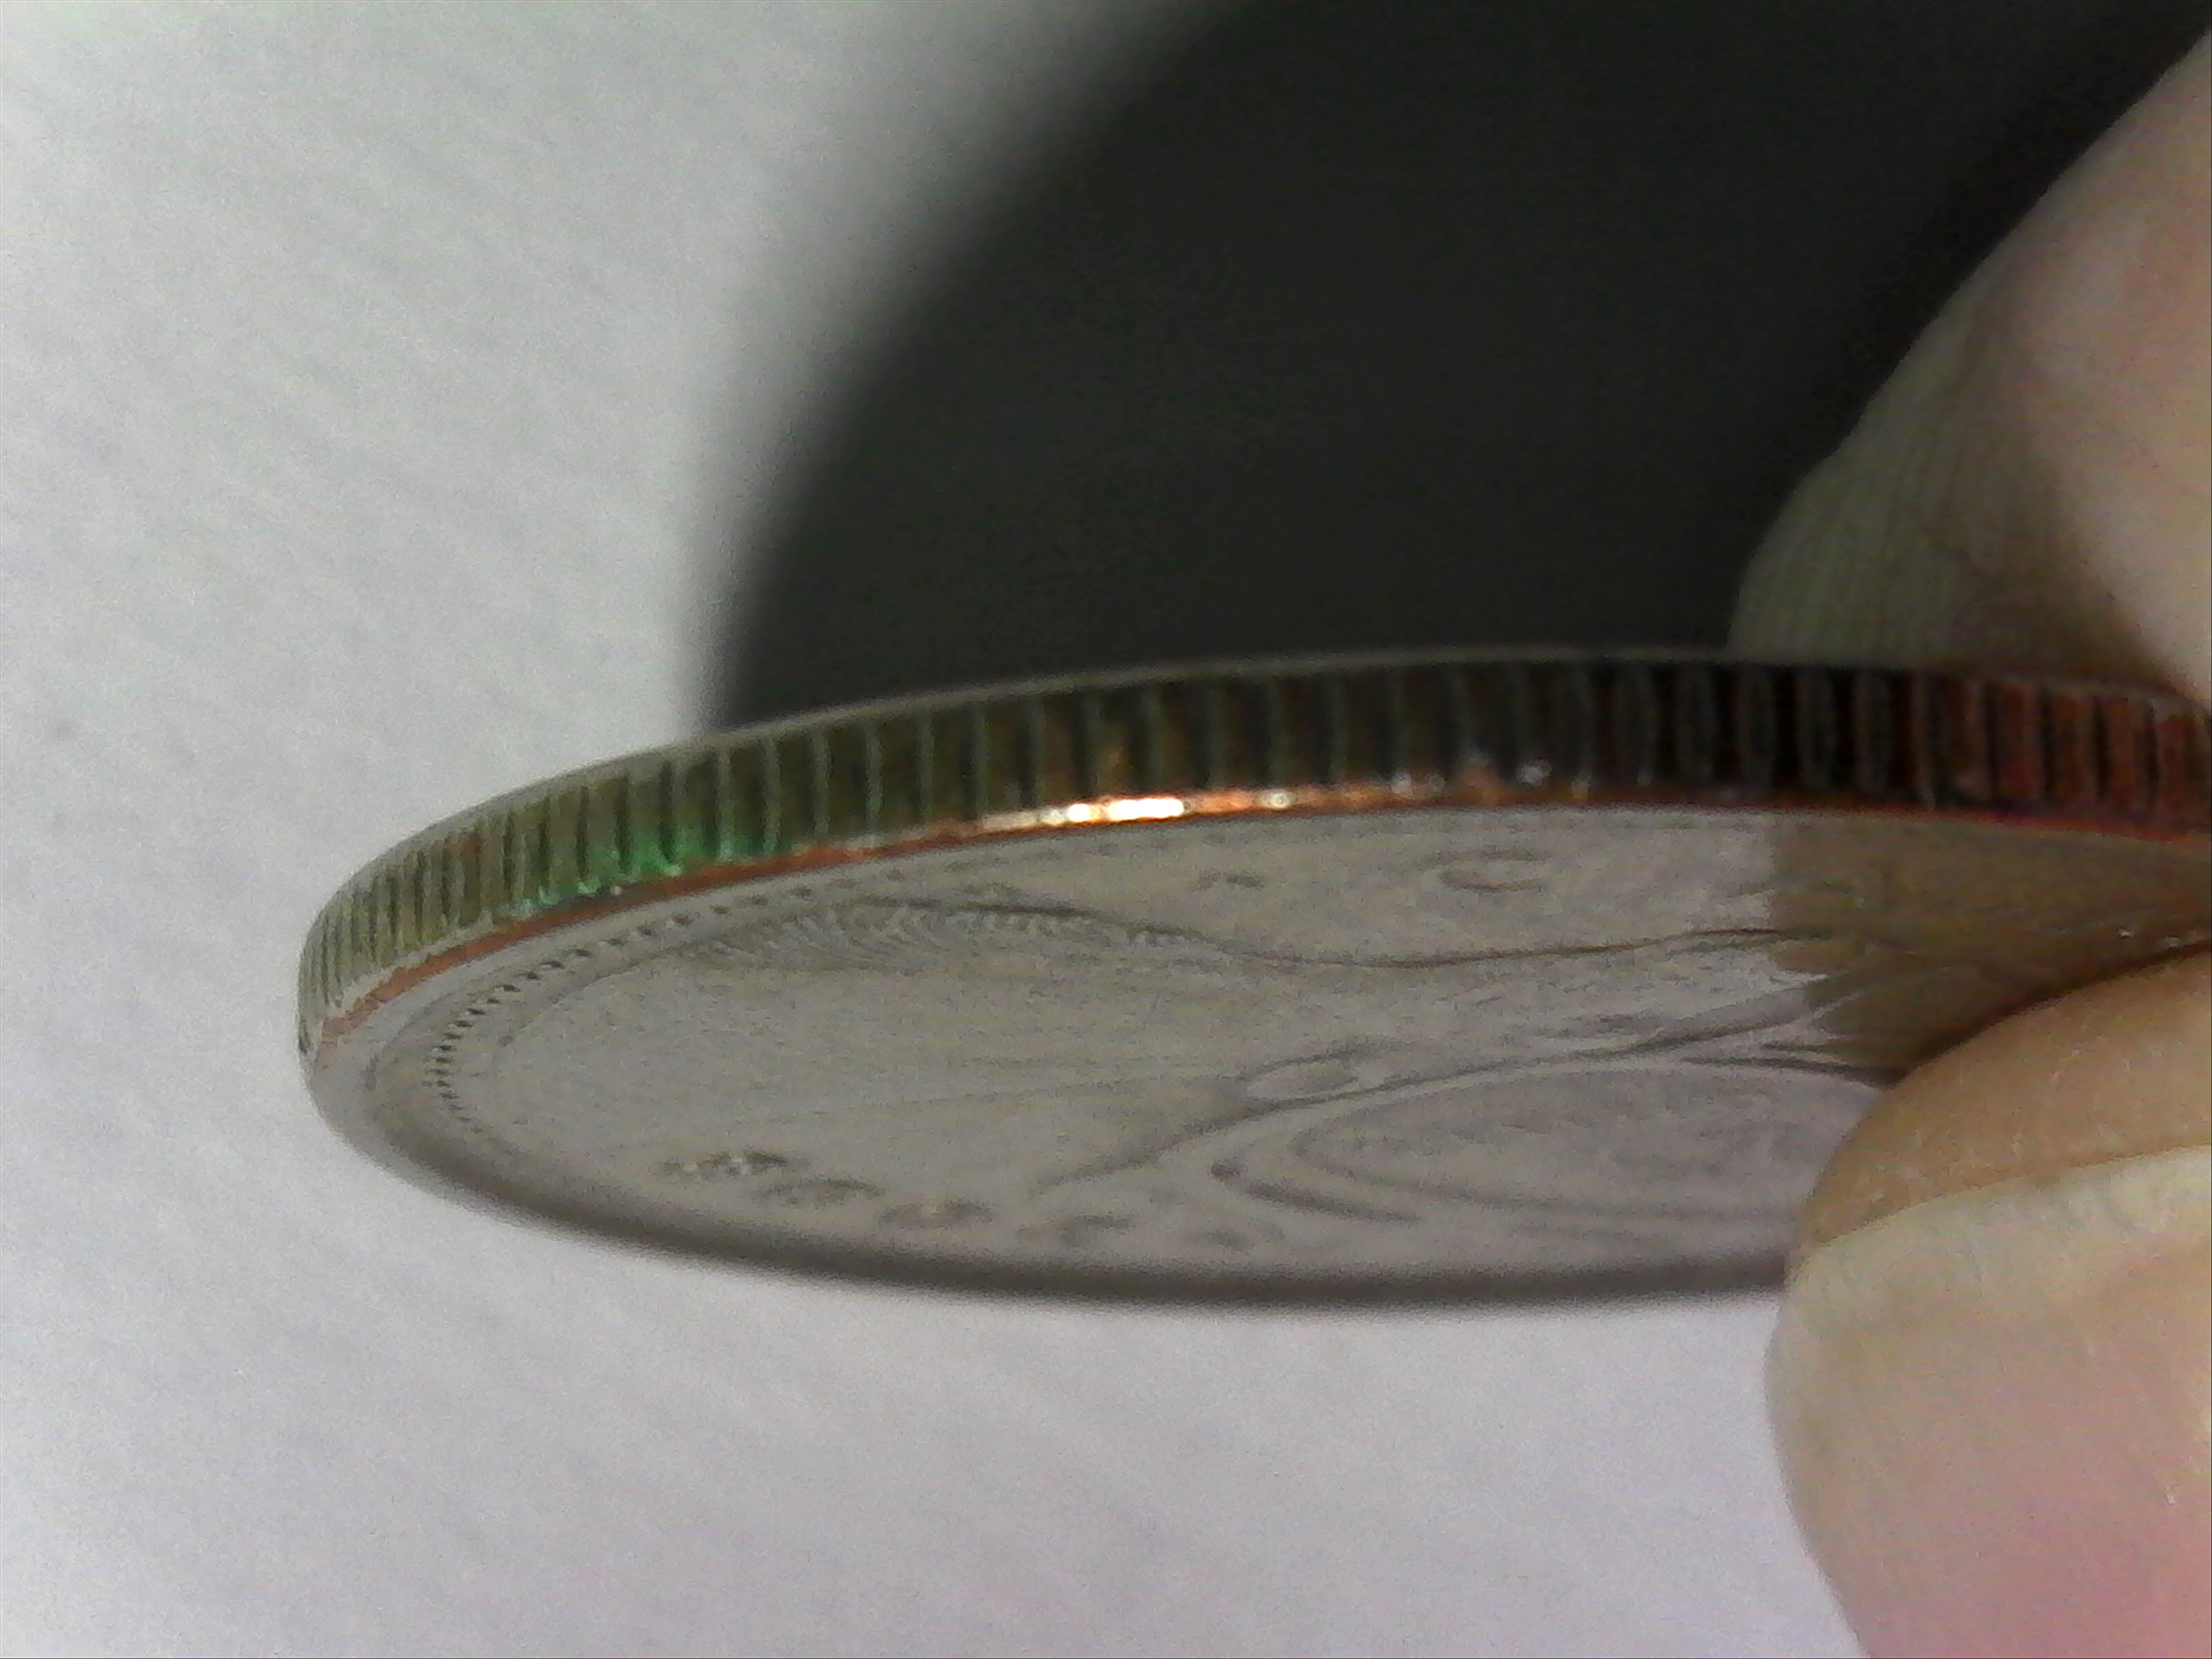 2008 25 ¢ with copper on edge.jpg